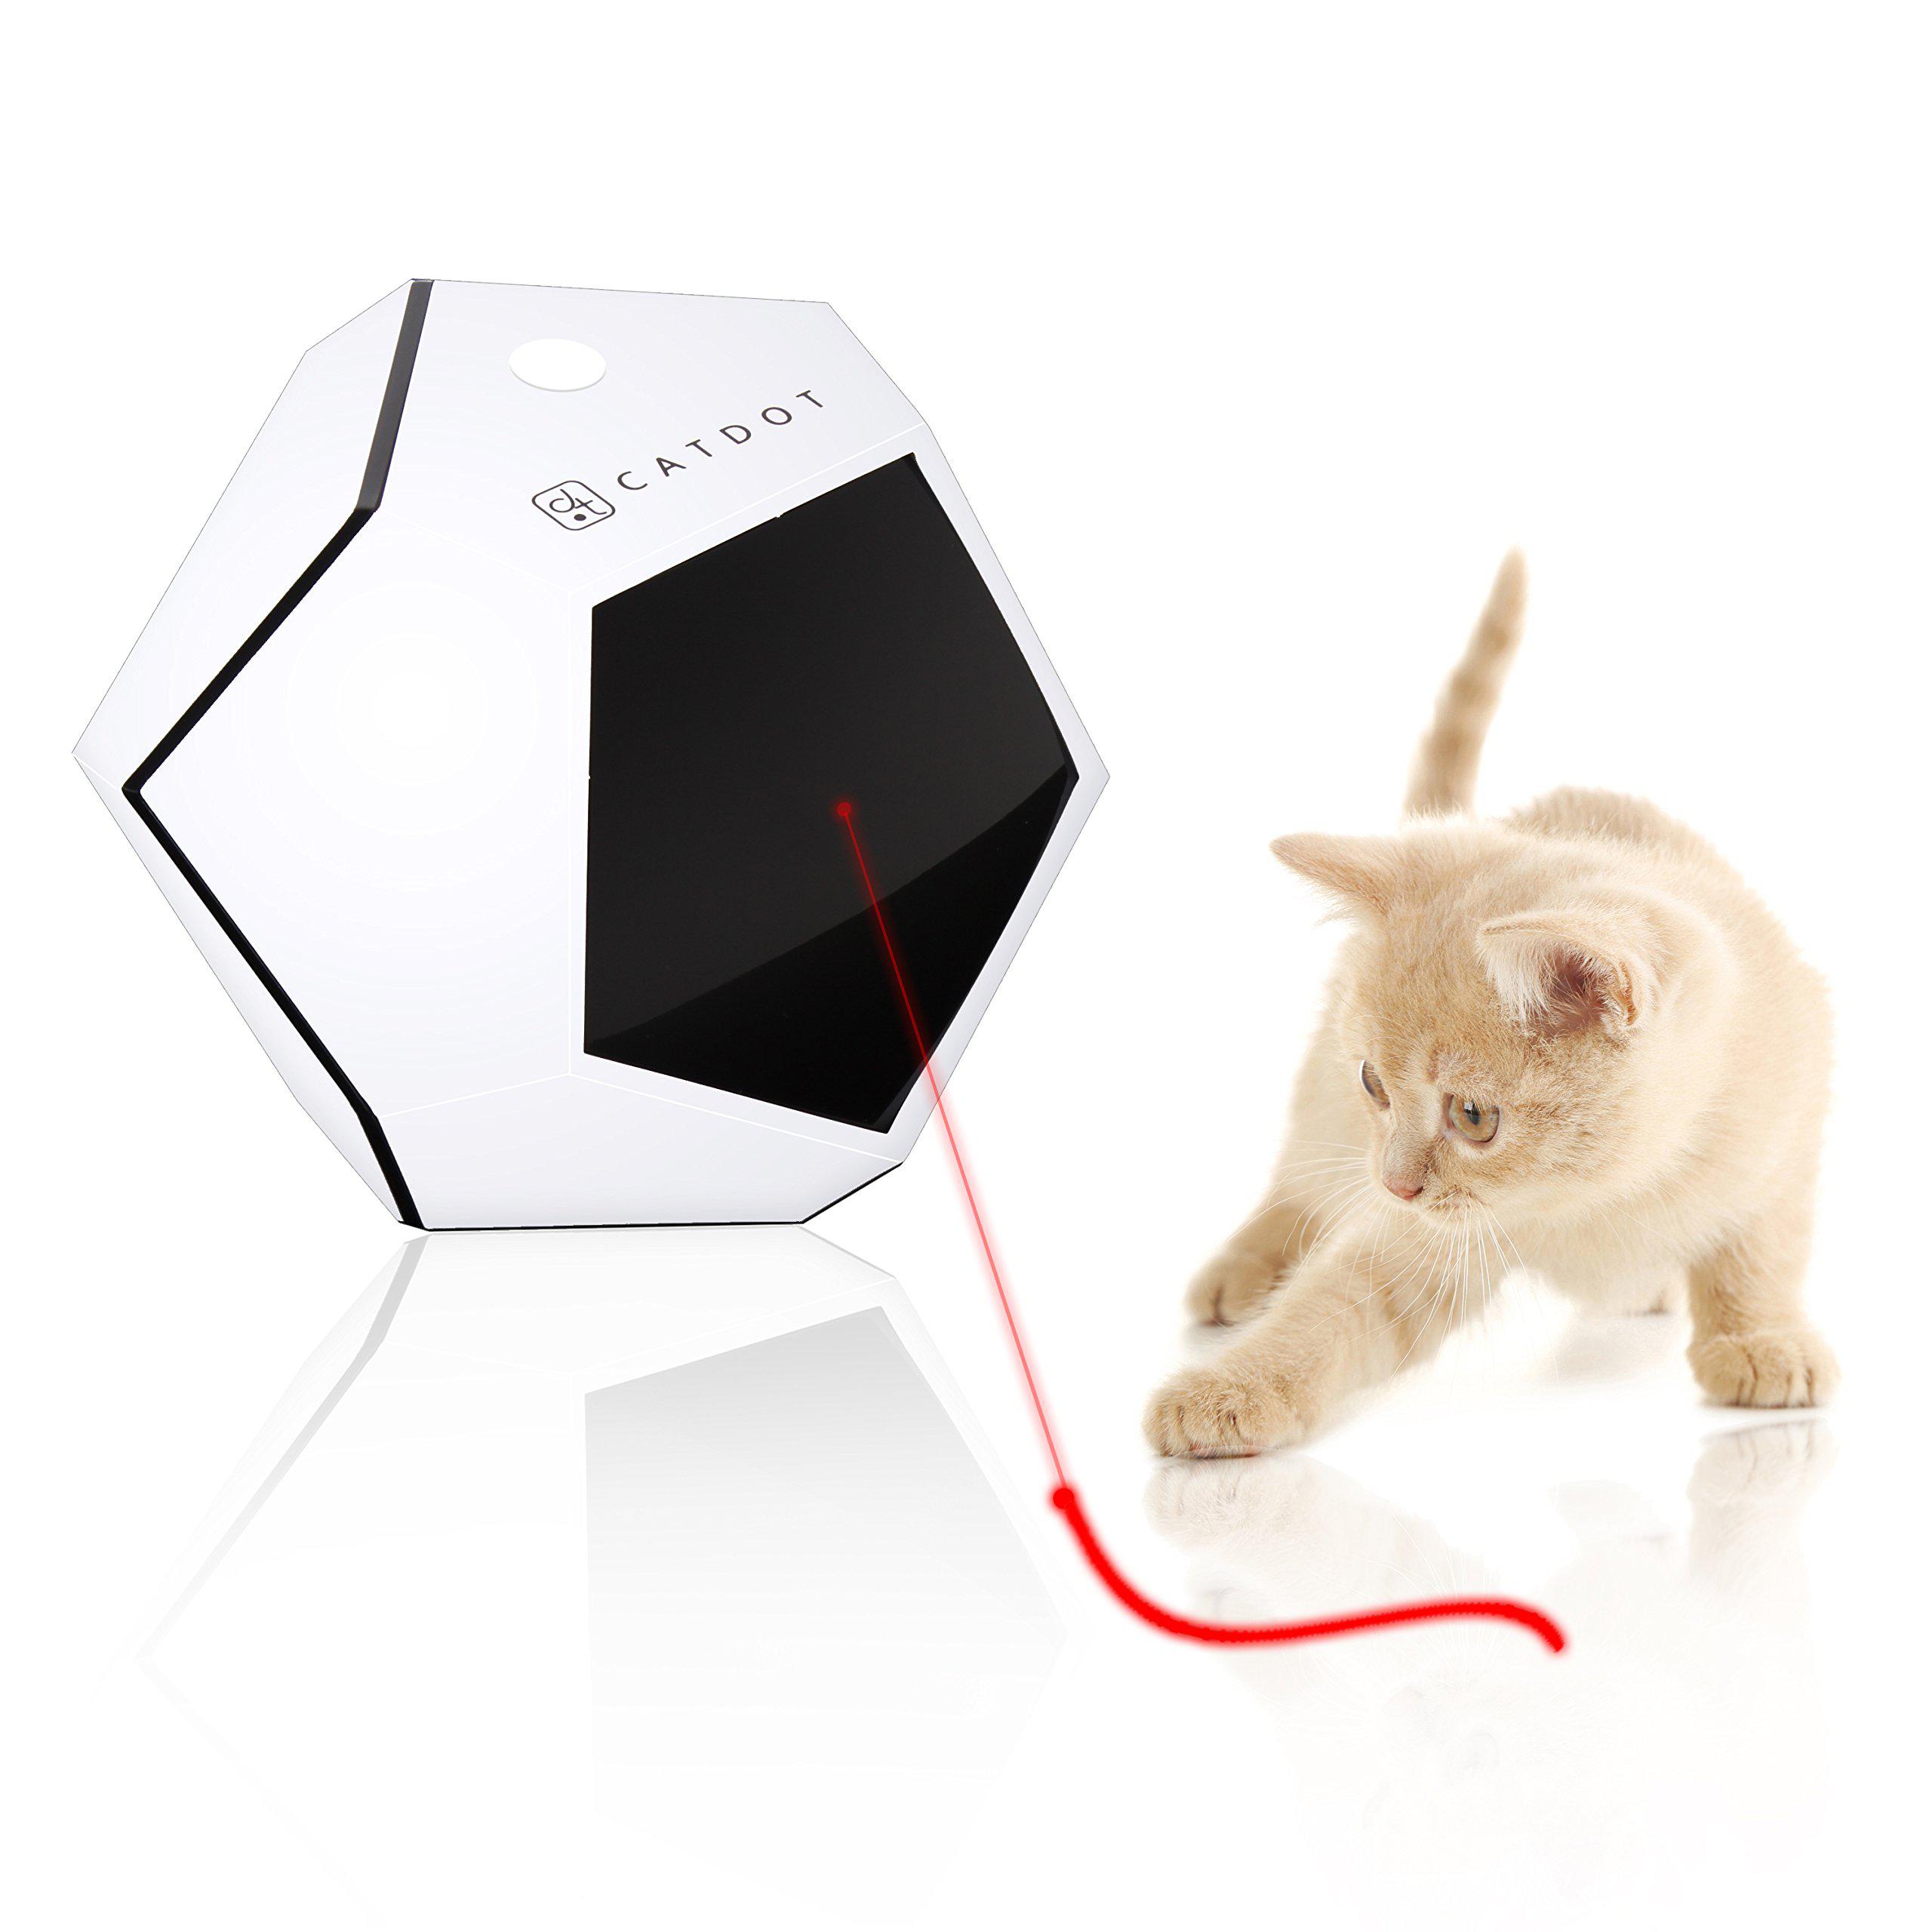 serenelife automatic cat cube toy - electronic rotating & moving teaser machine for interactive & smart sensory pet play - au